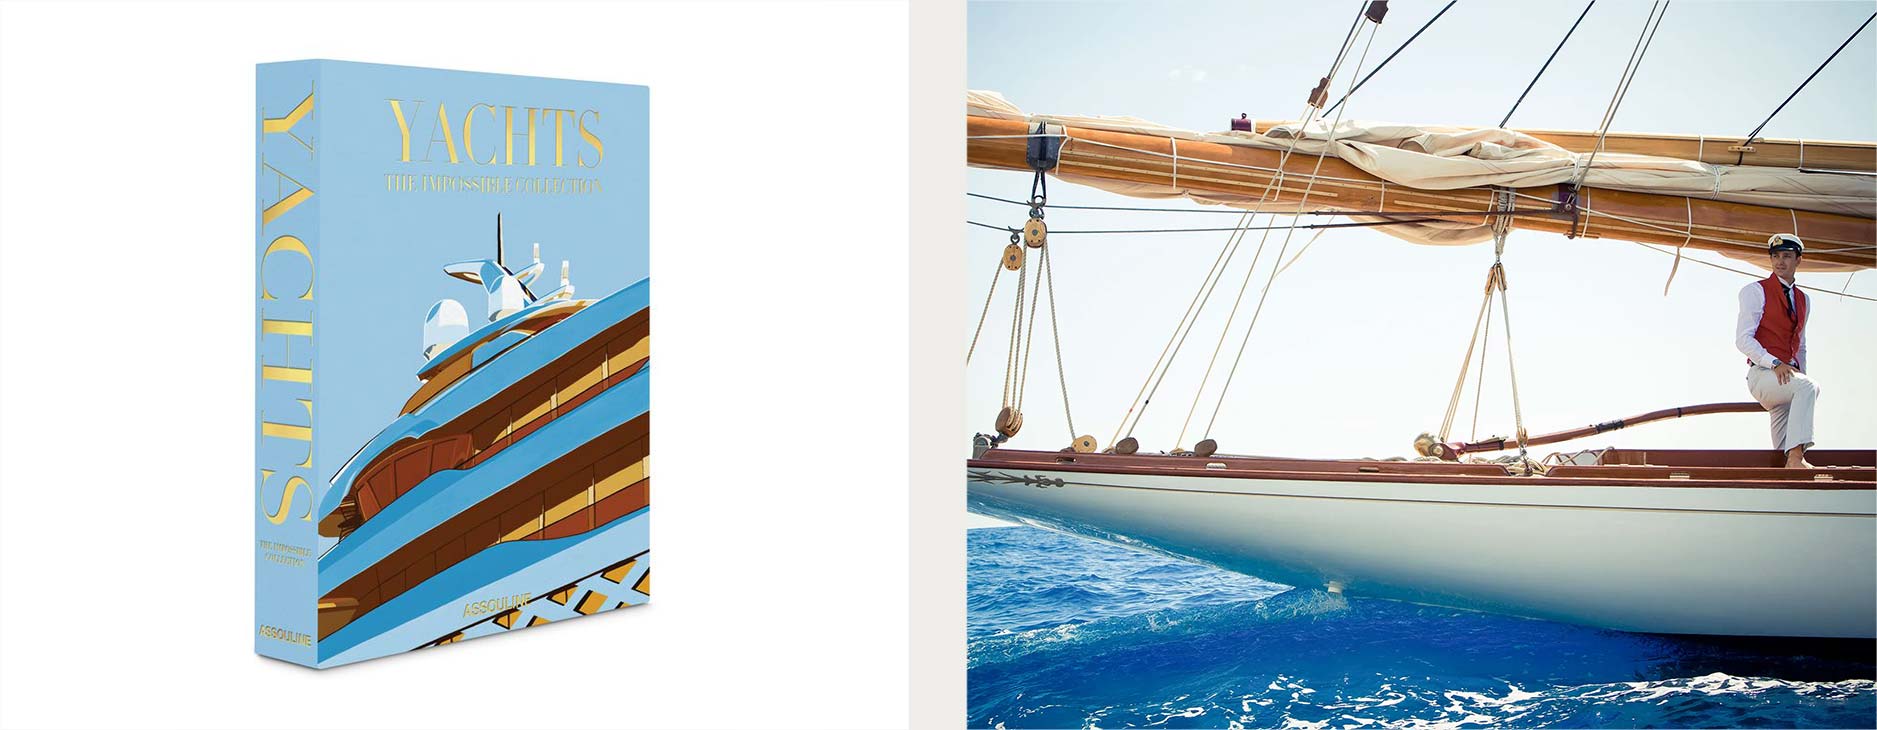 yacht design - the impossible collection, assouline